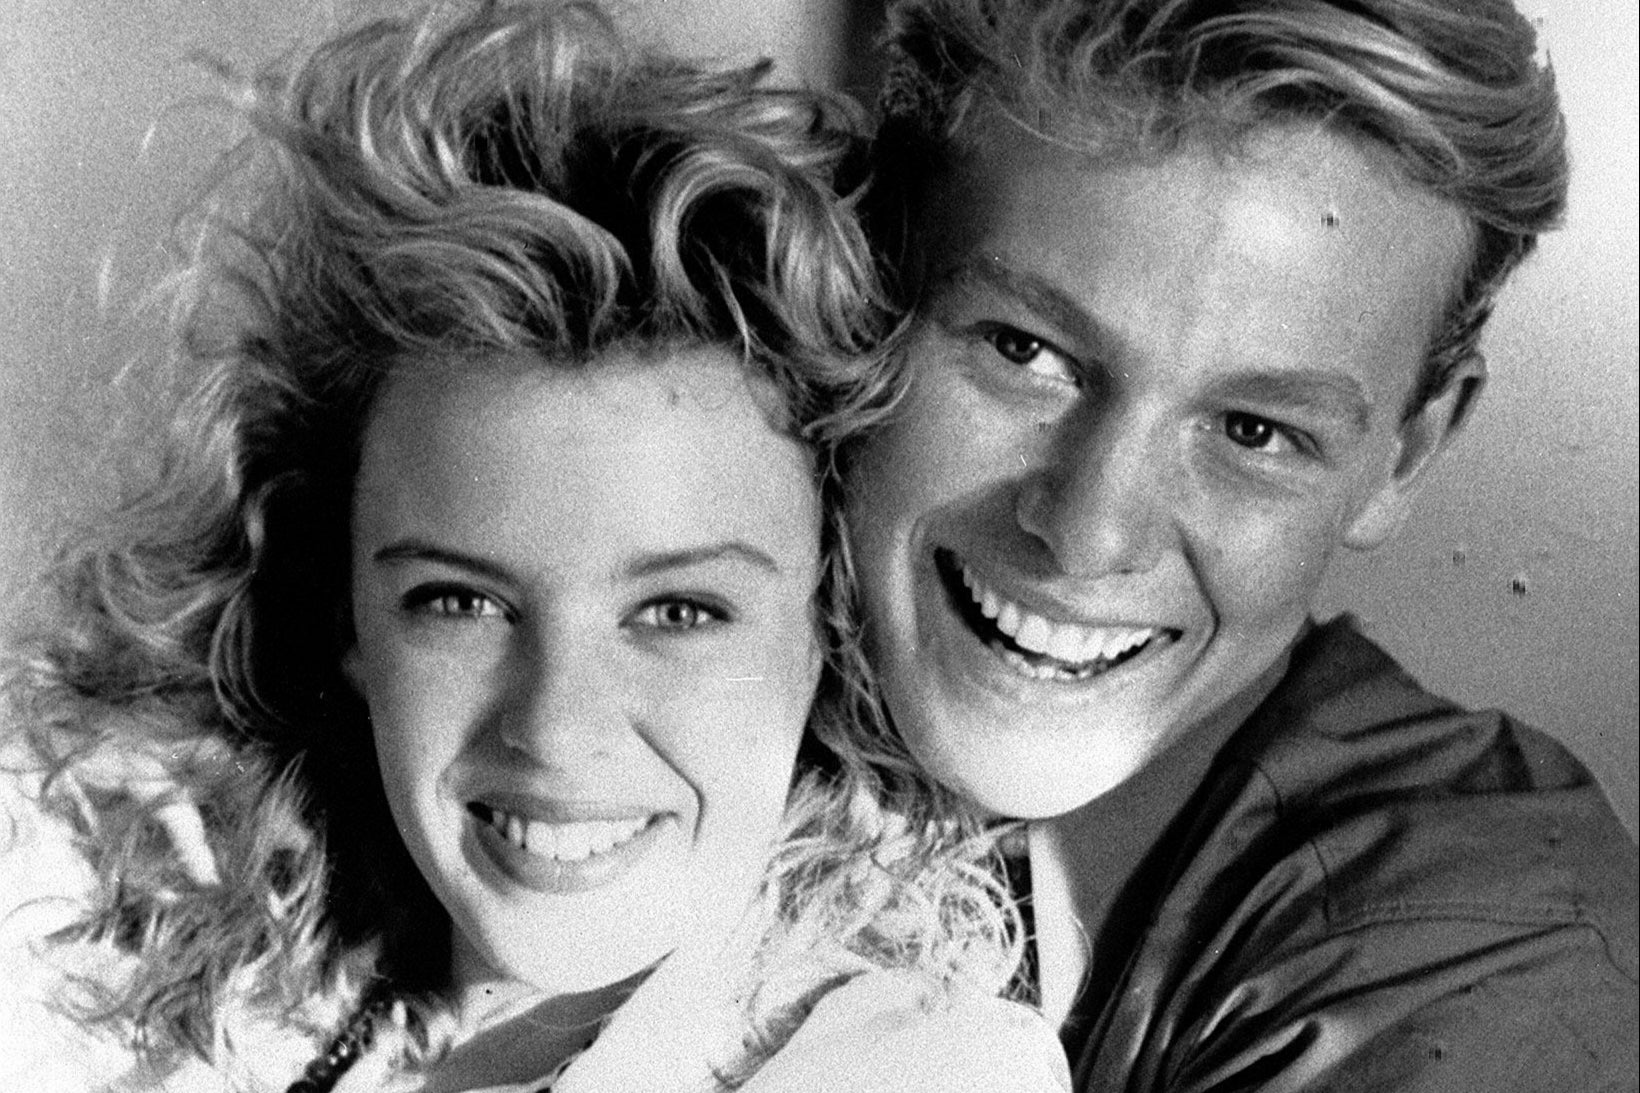 Minogue and Donovan at the height of their ‘Neighbours’ fame in 1988